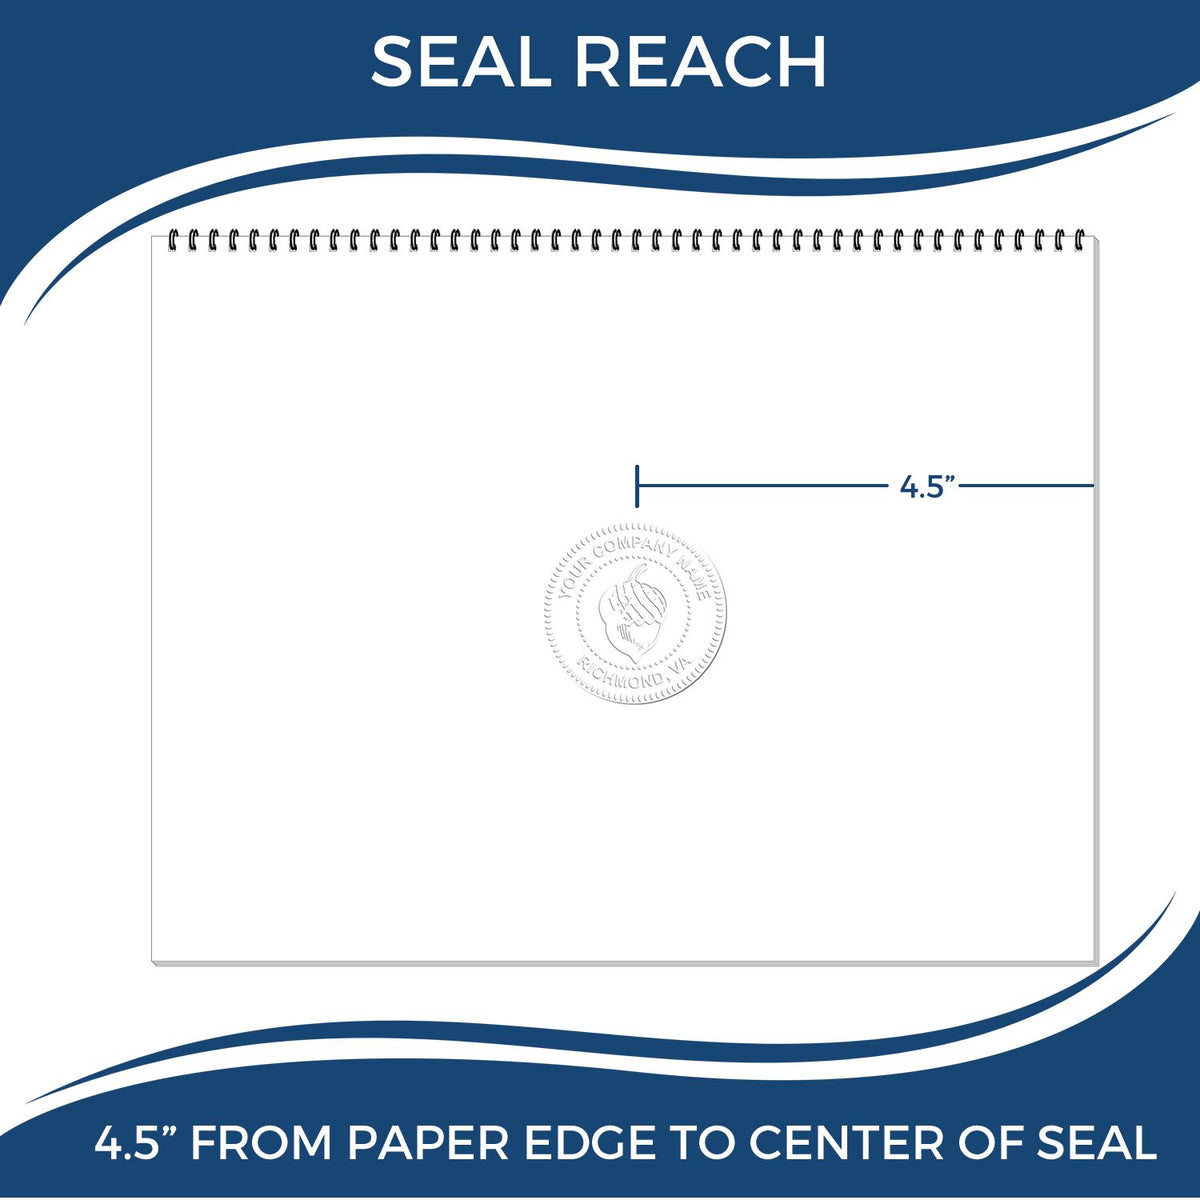 An infographic showing the seal reach which is represented by a ruler and a miniature seal image of the Extended Long Reach New Hampshire Architect Seal Embosser